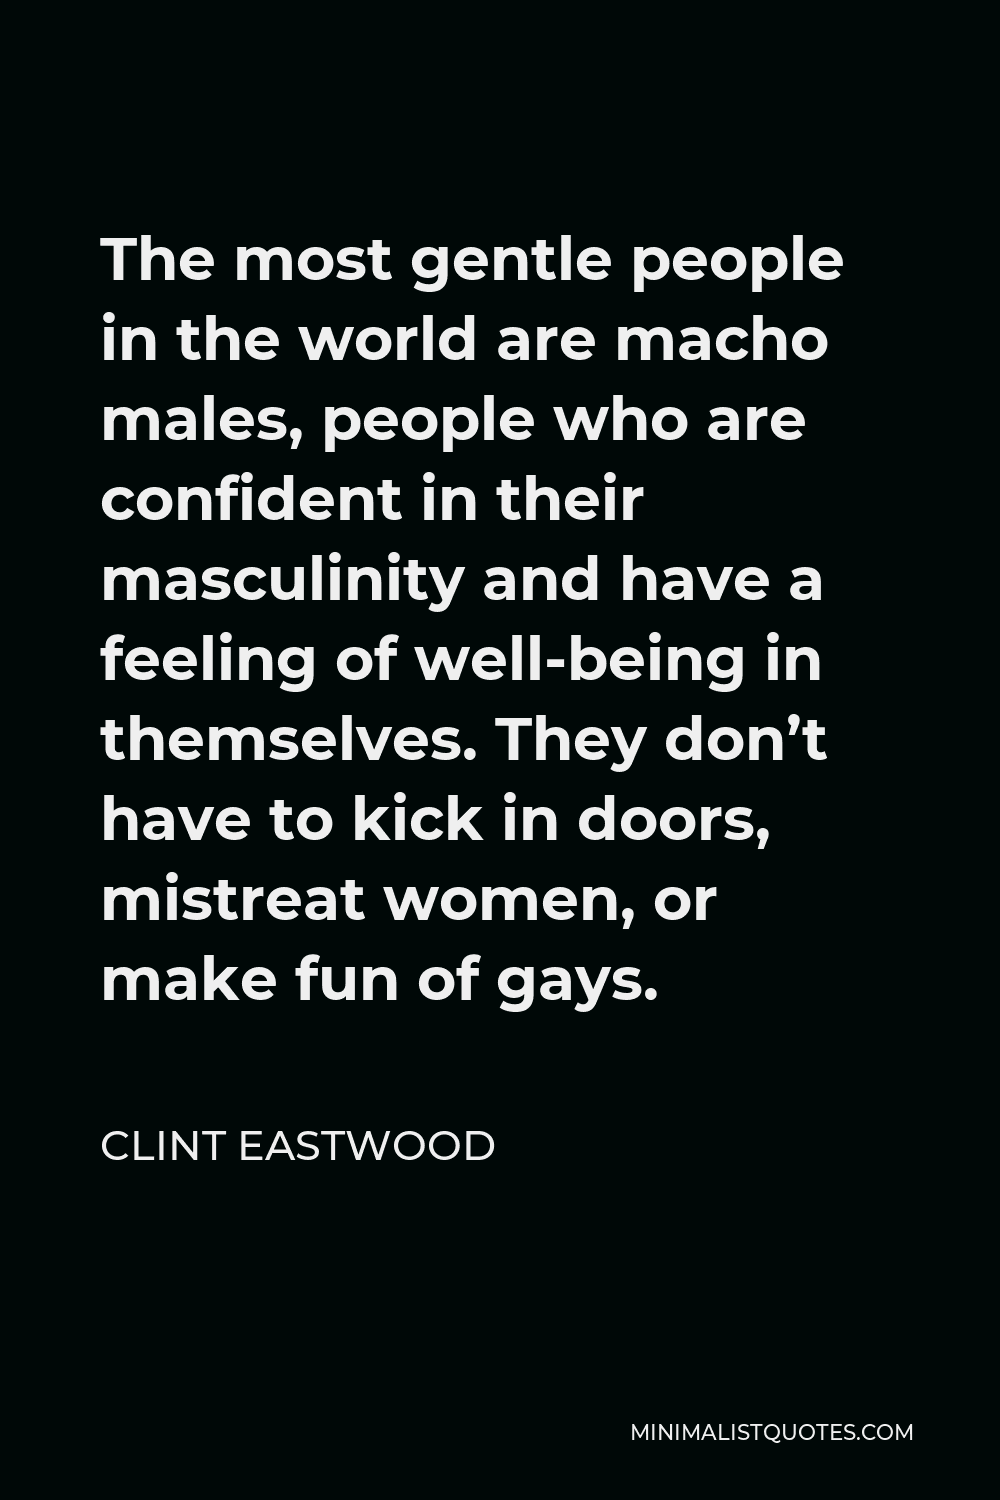 Clint Eastwood Quote - The most gentle people in the world are macho males, people who are confident in their masculinity and have a feeling of well-being in themselves. They don’t have to kick in doors, mistreat women, or make fun of gays.